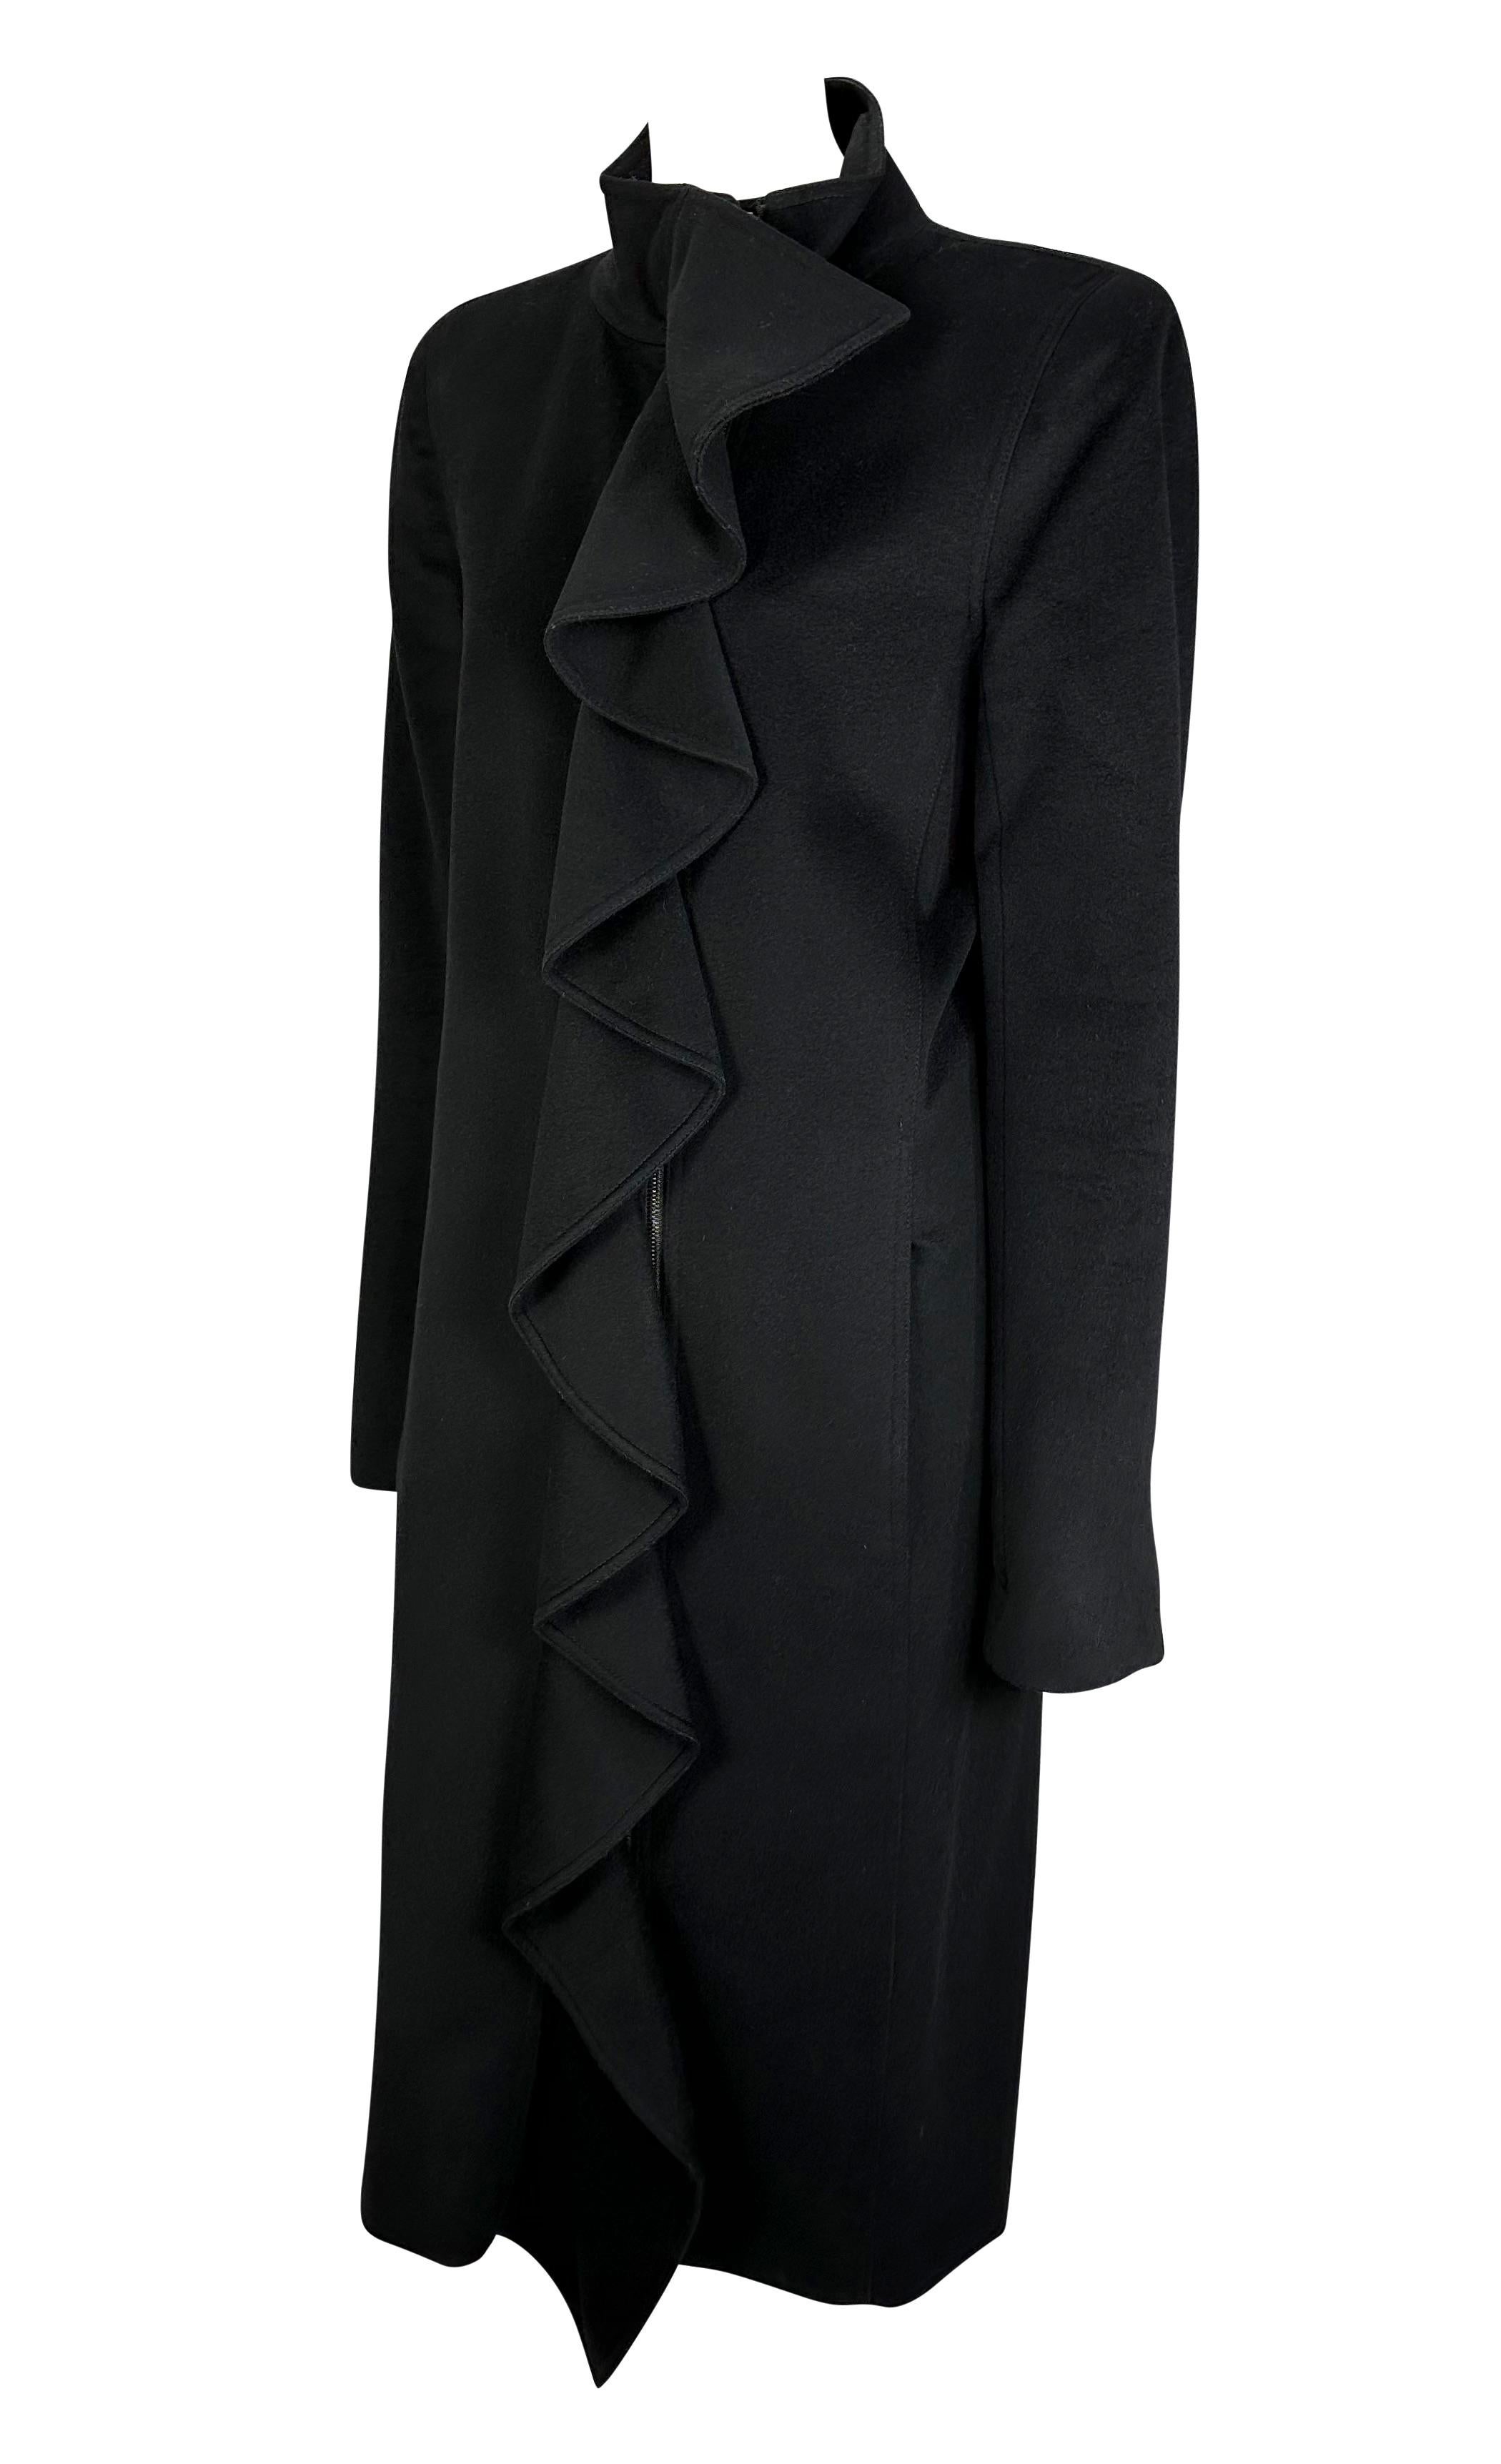 F/W 2003 Yves Saint Laurent by Tom Ford Runway Ruffle Overcoat Black In Excellent Condition For Sale In West Hollywood, CA